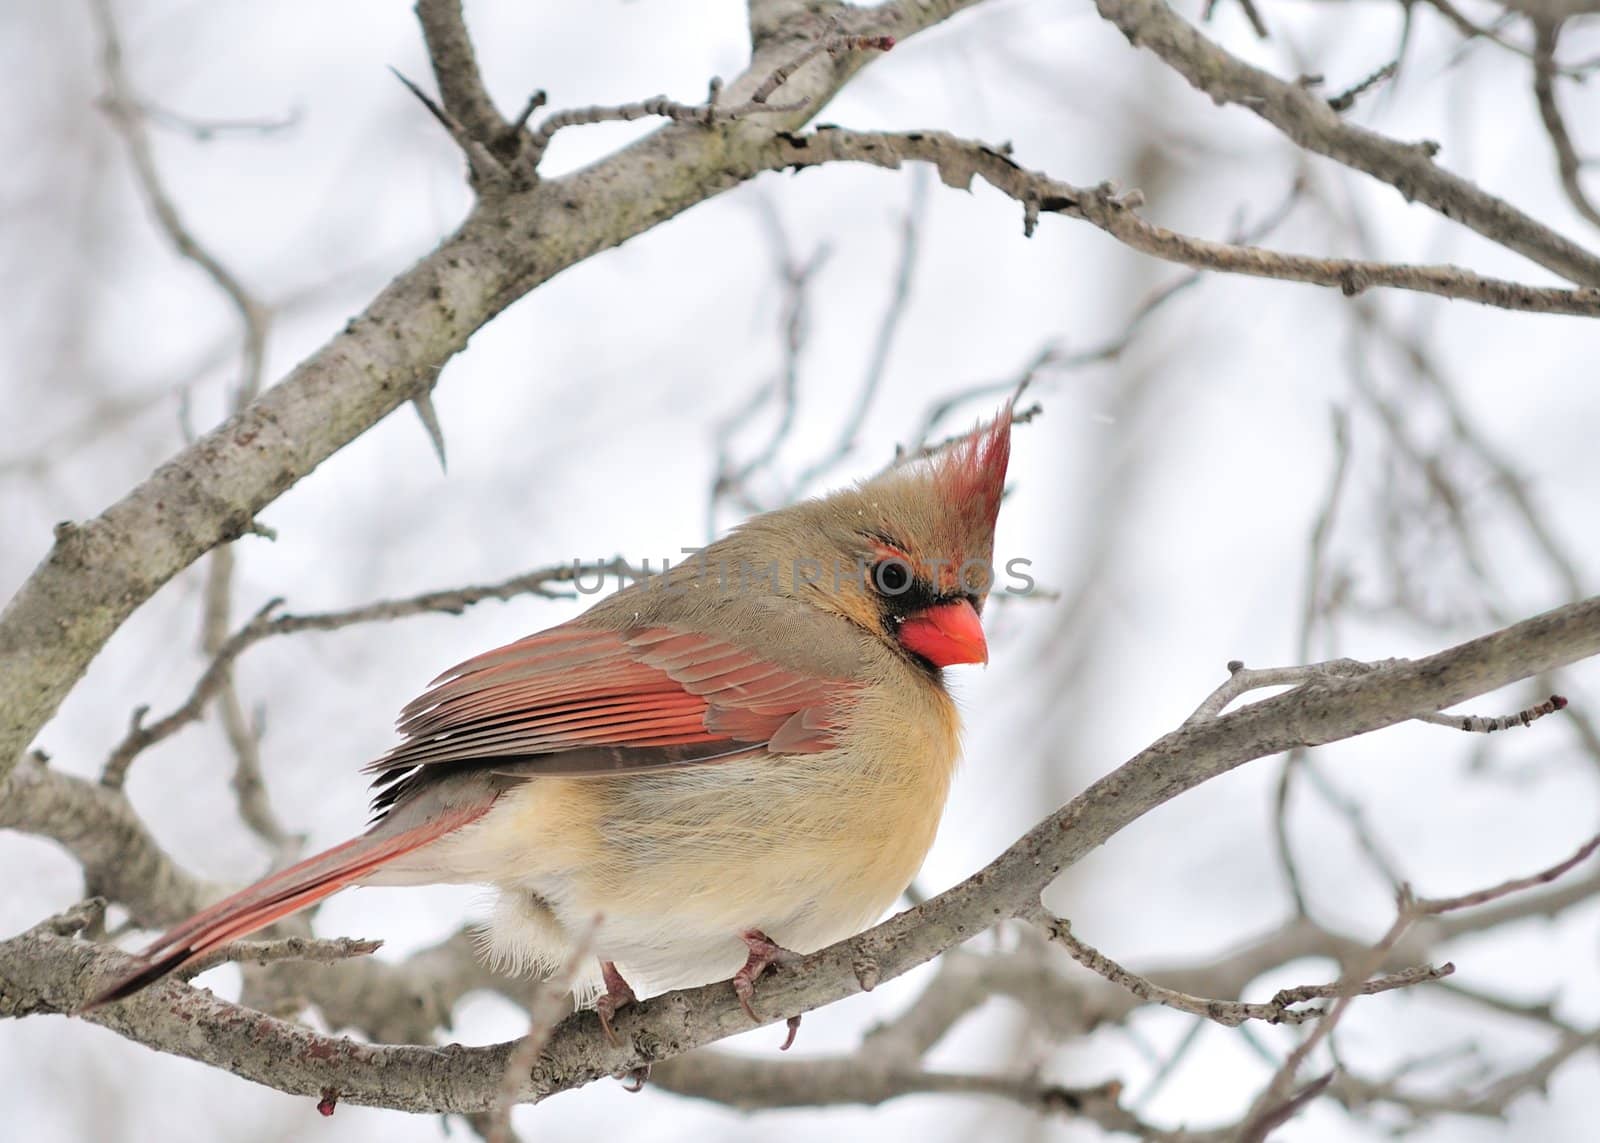 A female cardinal perched on a tree branch.